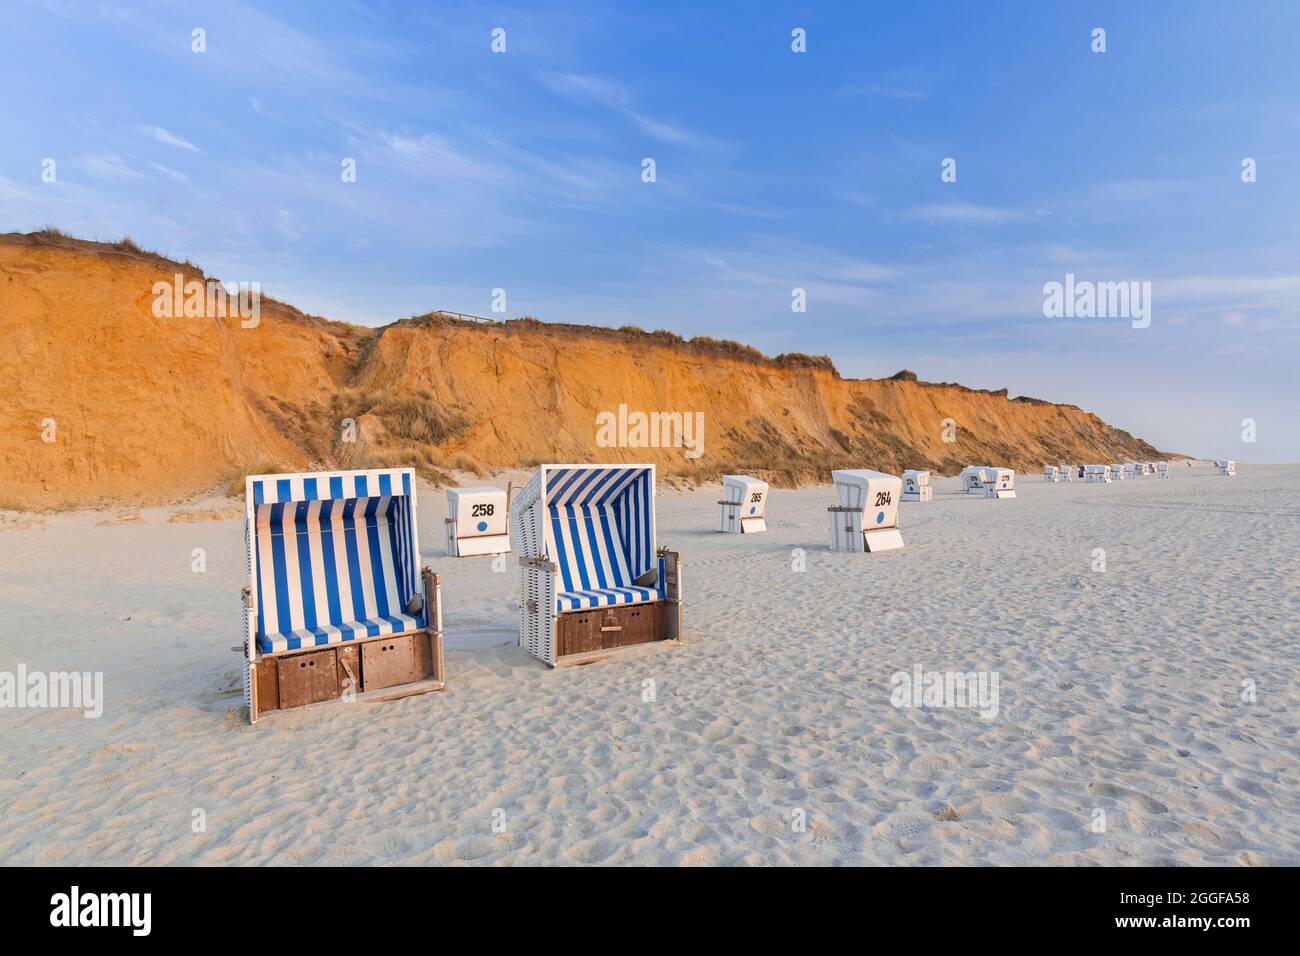 Roofed wicker beach chairs at the Rotes Kliff / Rote Kliff, sea cliffs near Kampen on the German North Sea island Sylt, Schleswig-Holstein, Germany Stock Photo